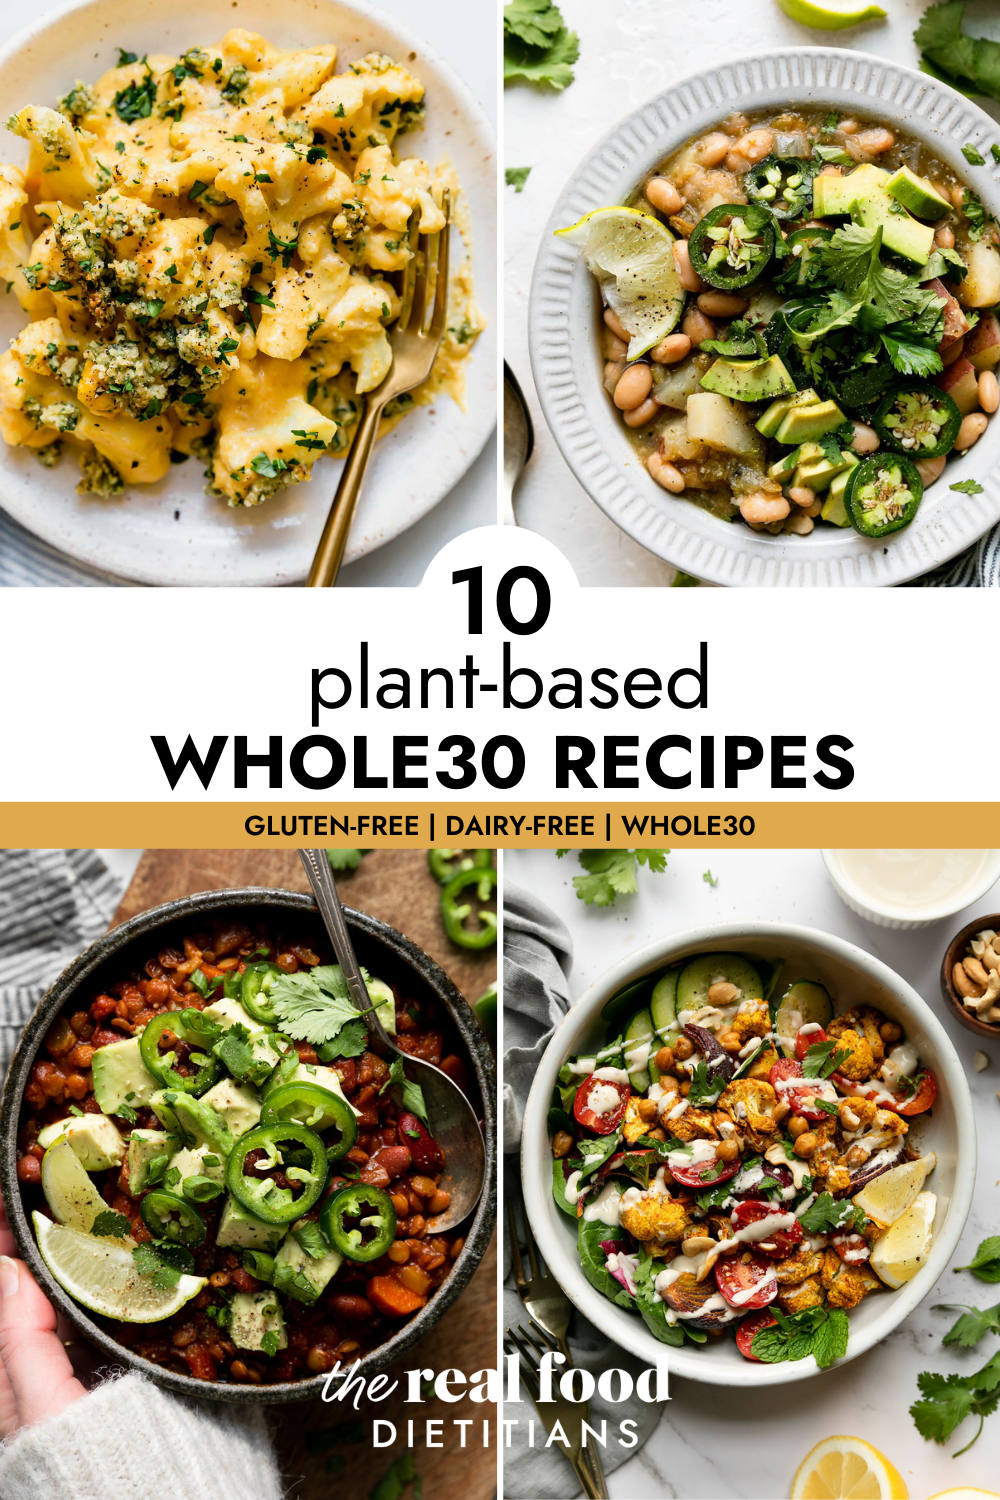 30 Whole30 Appetizers (Gluten and Dairy-free) - The Real Food Dietitians